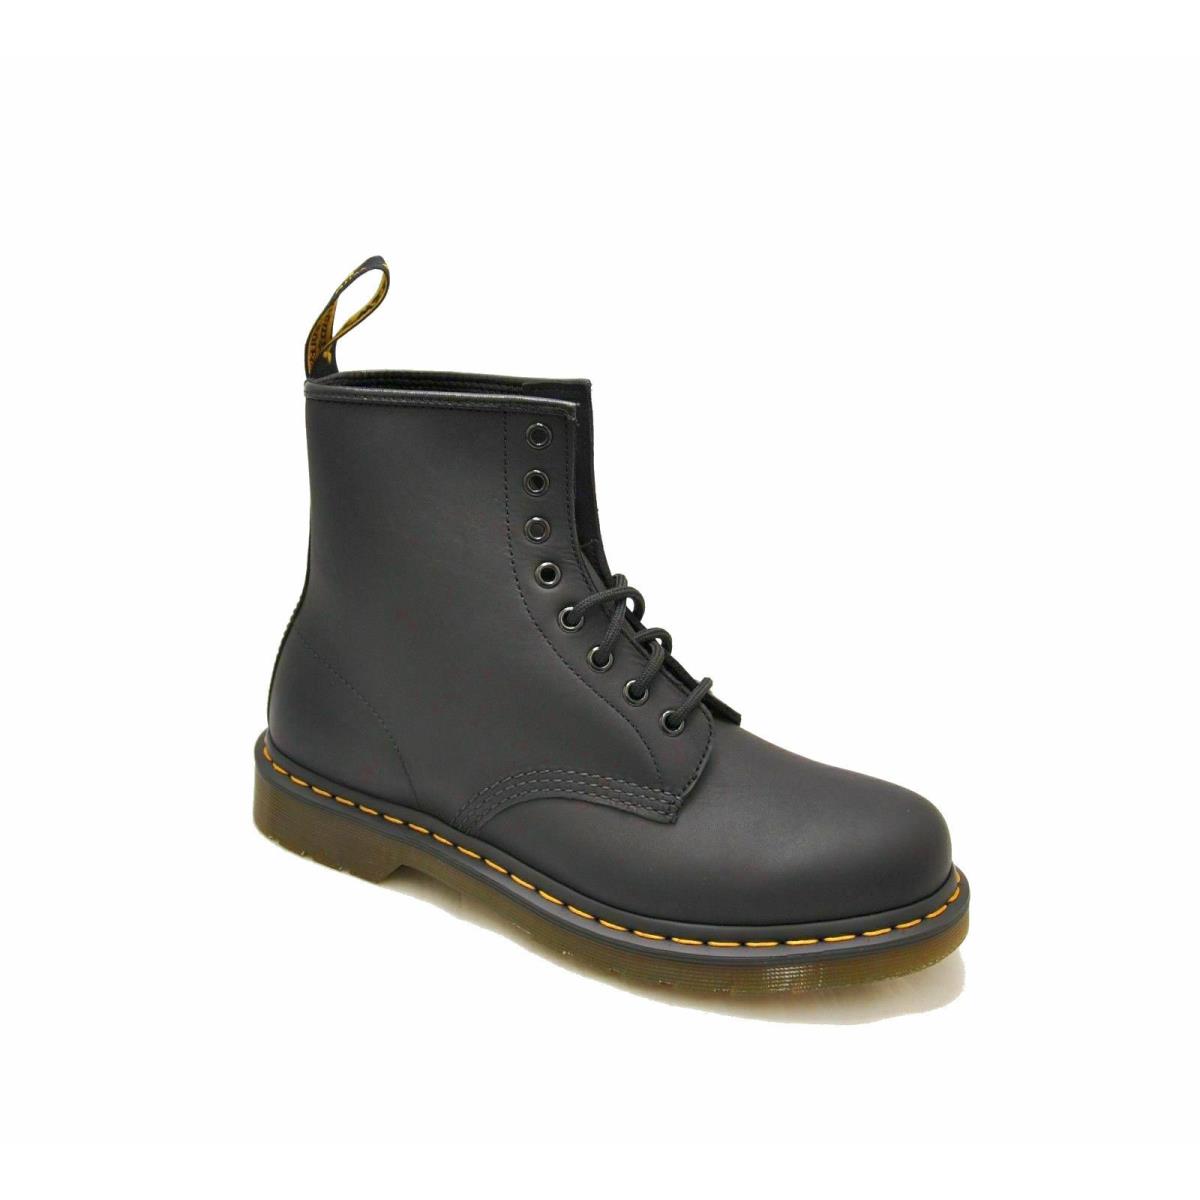 Men`s Shoes Dr. Martens 1460 8 Eye Leather Lace Up Boots Black Greasy 11822003